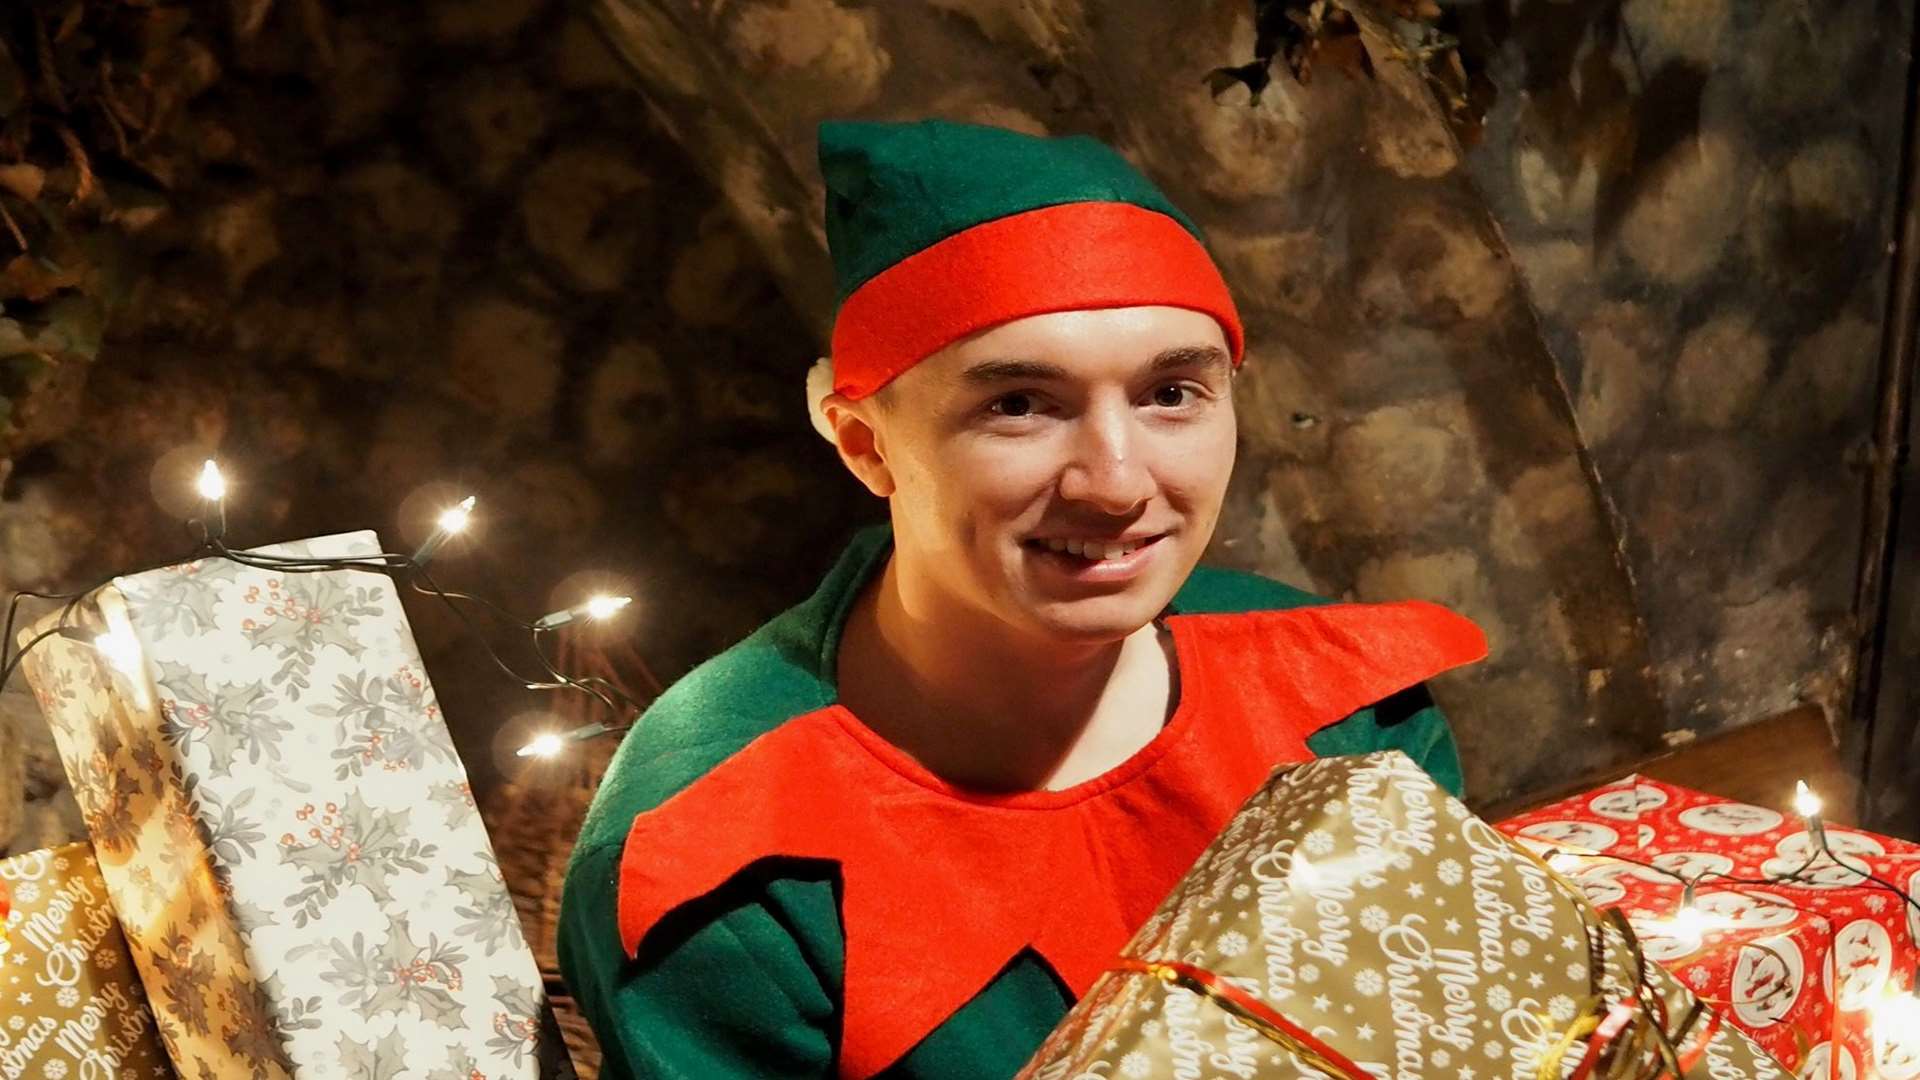 An elf will help with your Christmas list at Canterbury Tales